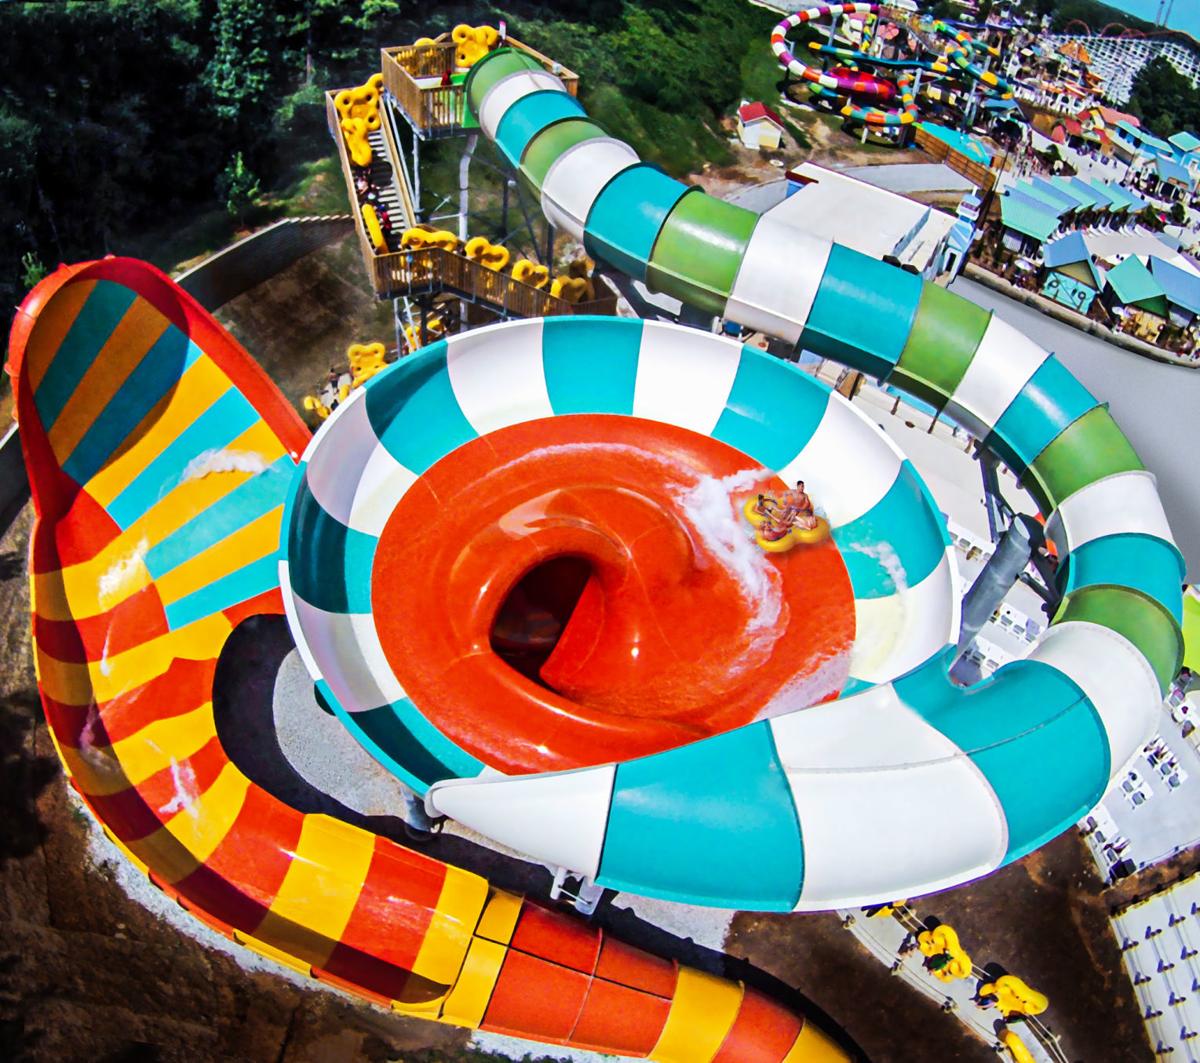 Water slide injury at Six Flags St. Louis highlights lax regulation | Political Fix | www.ermes-unice.fr